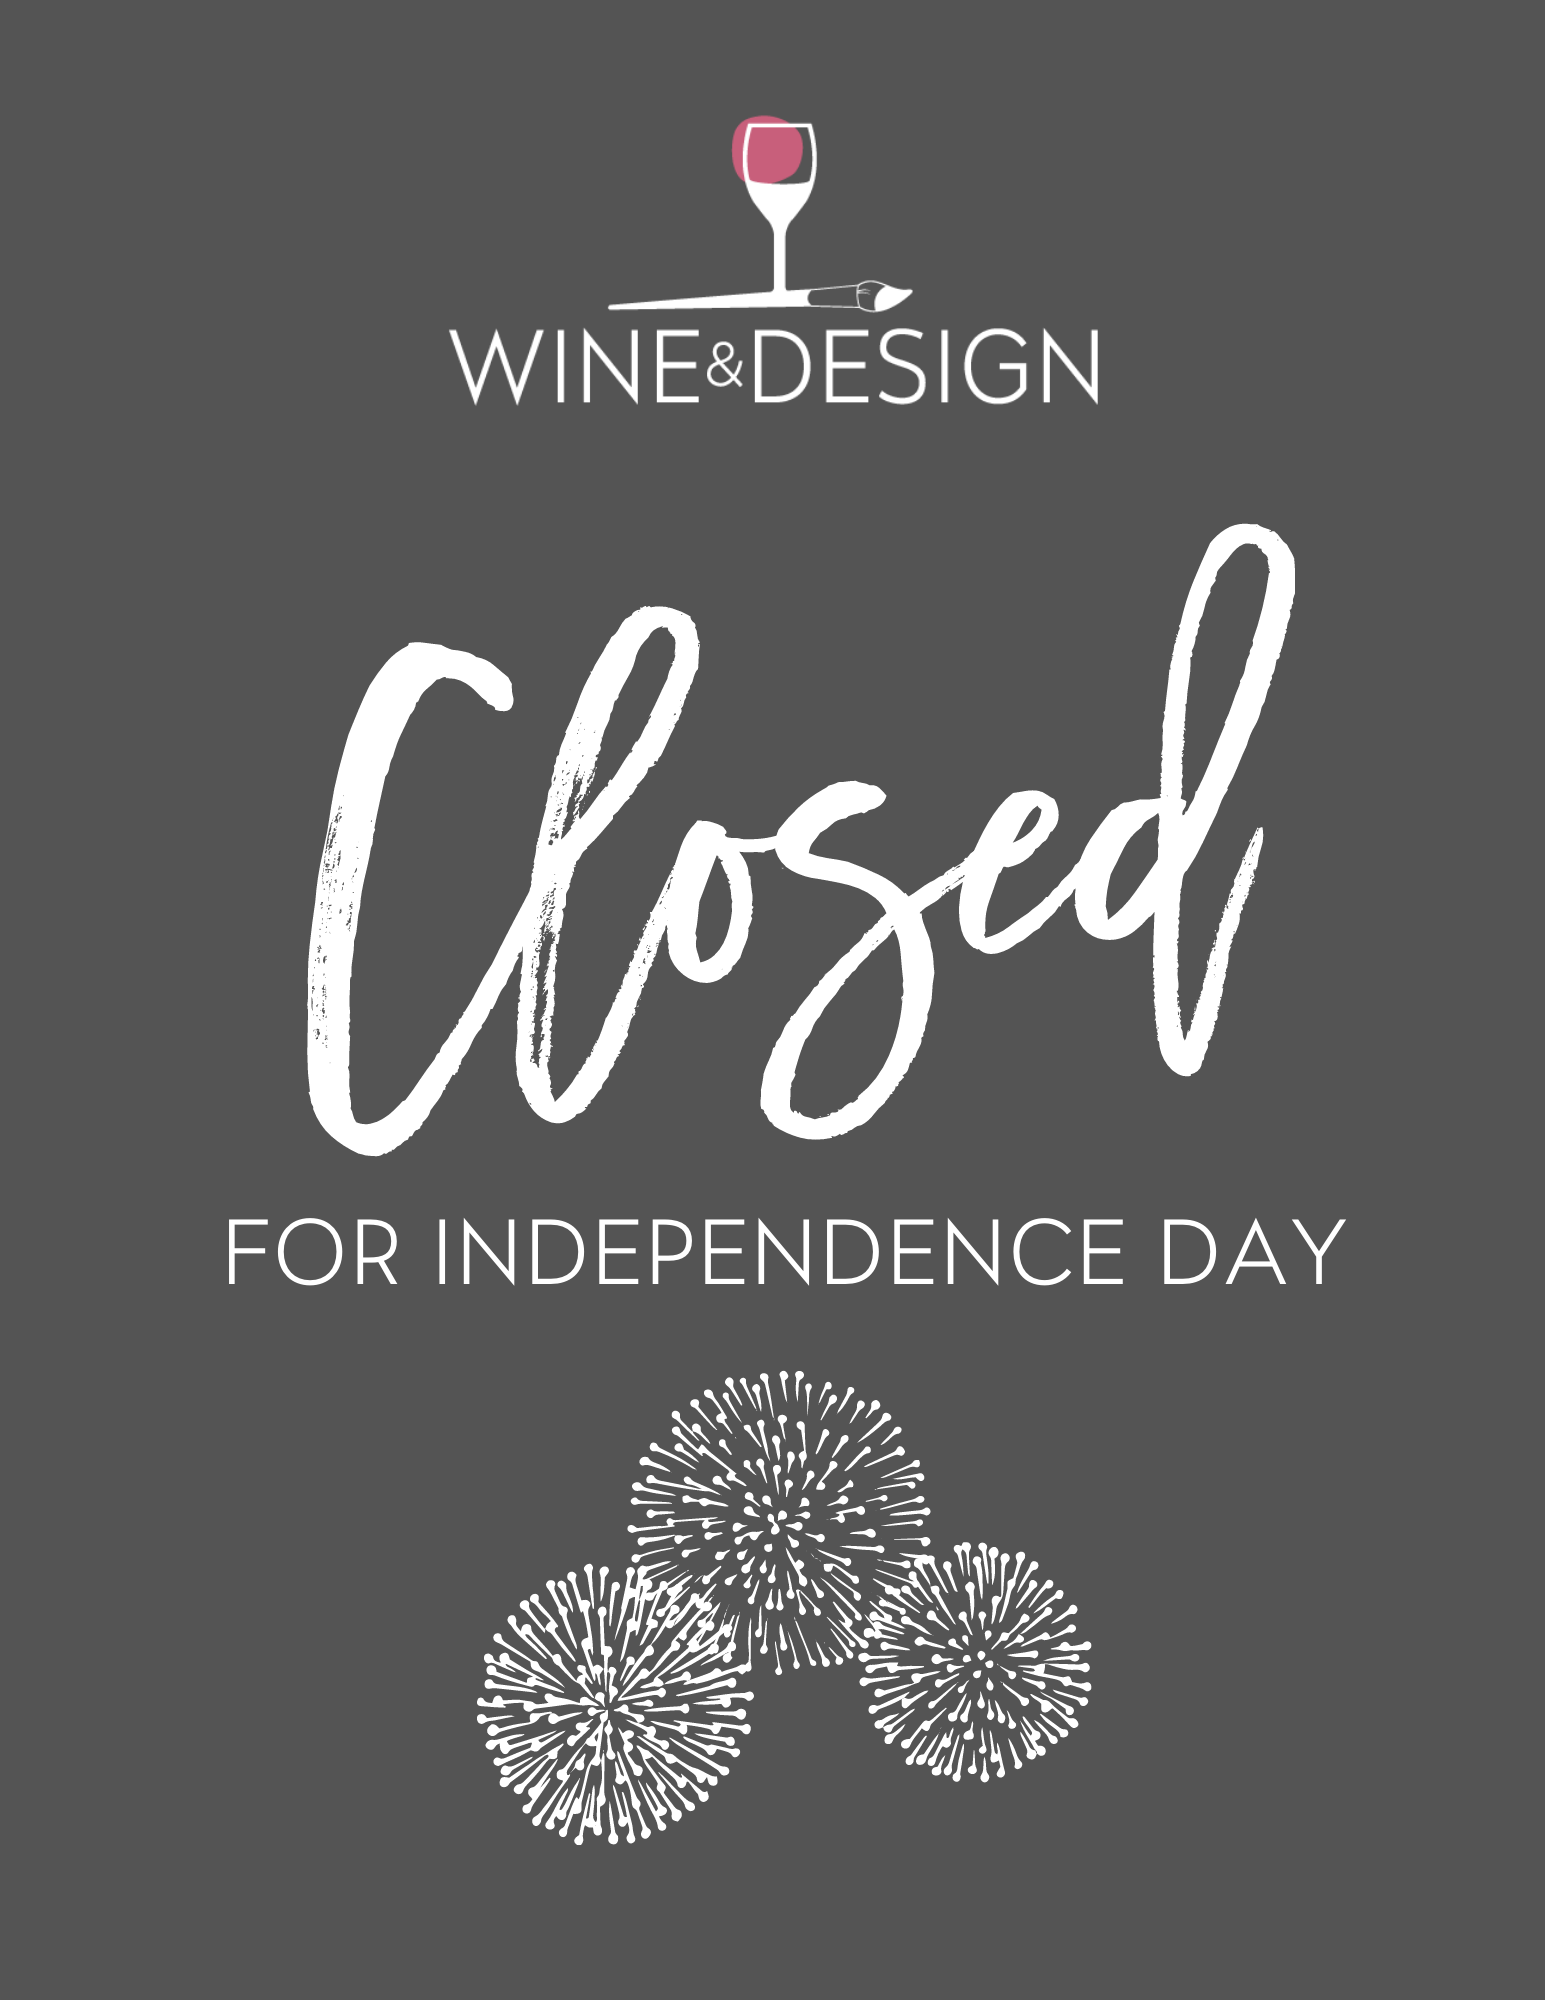 CLOSED FOR THE 4TH OF JULY 